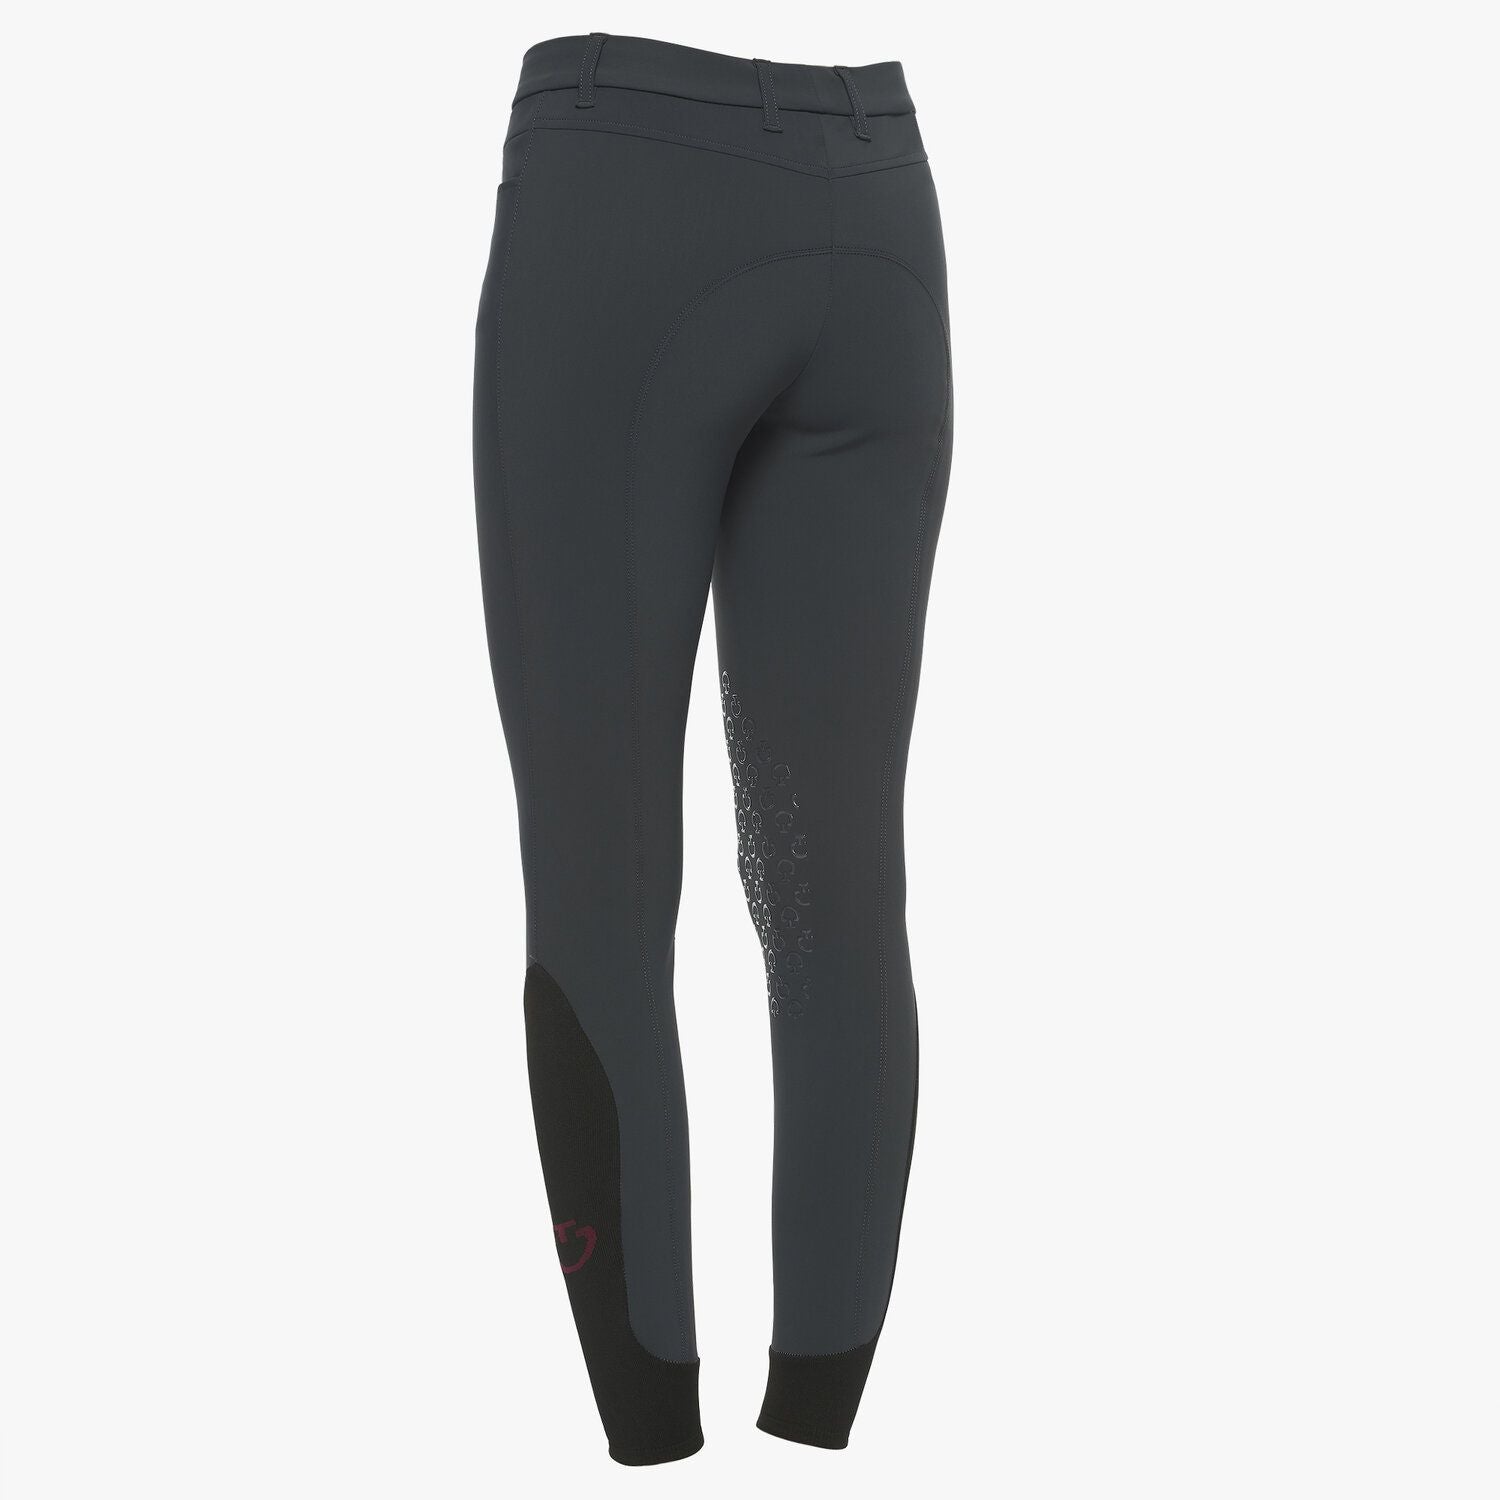 Cavalleria Toscana Dark grey System Grip breeches are made from a technical four-way stretch jersey fabric.   The fabric is also anti-UV, fast-drying and anti-bacterial, making the breeches ideal for the busy competition rider.